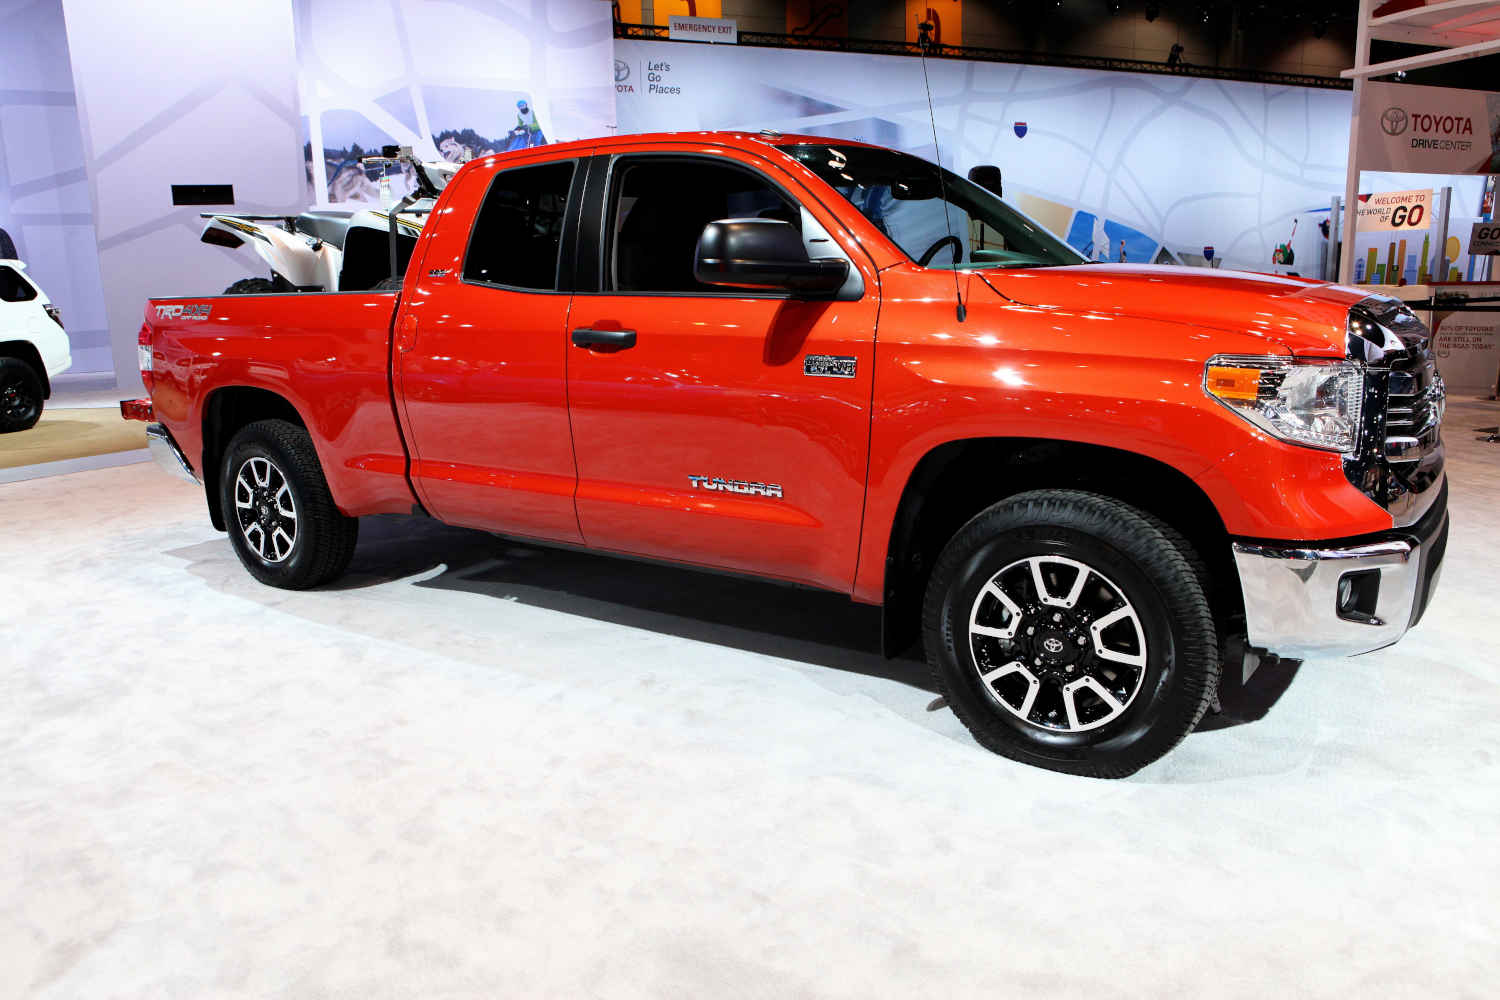 Find out what breaks on the Toyota Tundra seen here in 2017